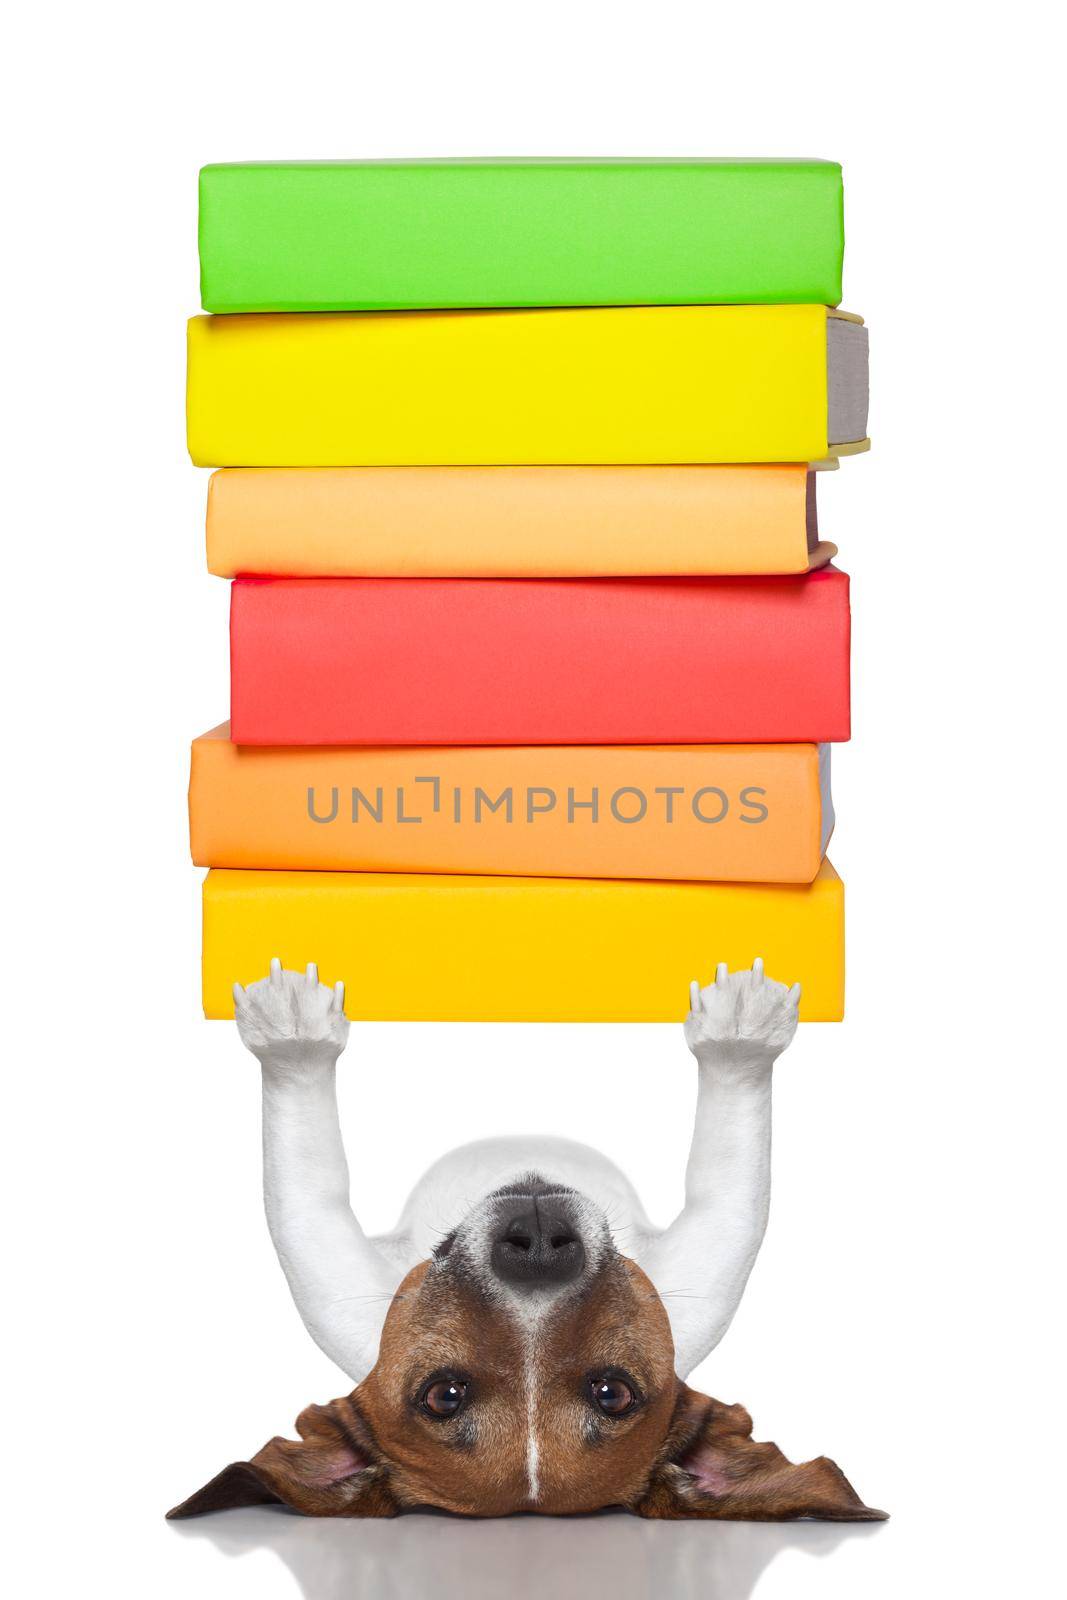 smart dog lifting a stack of books